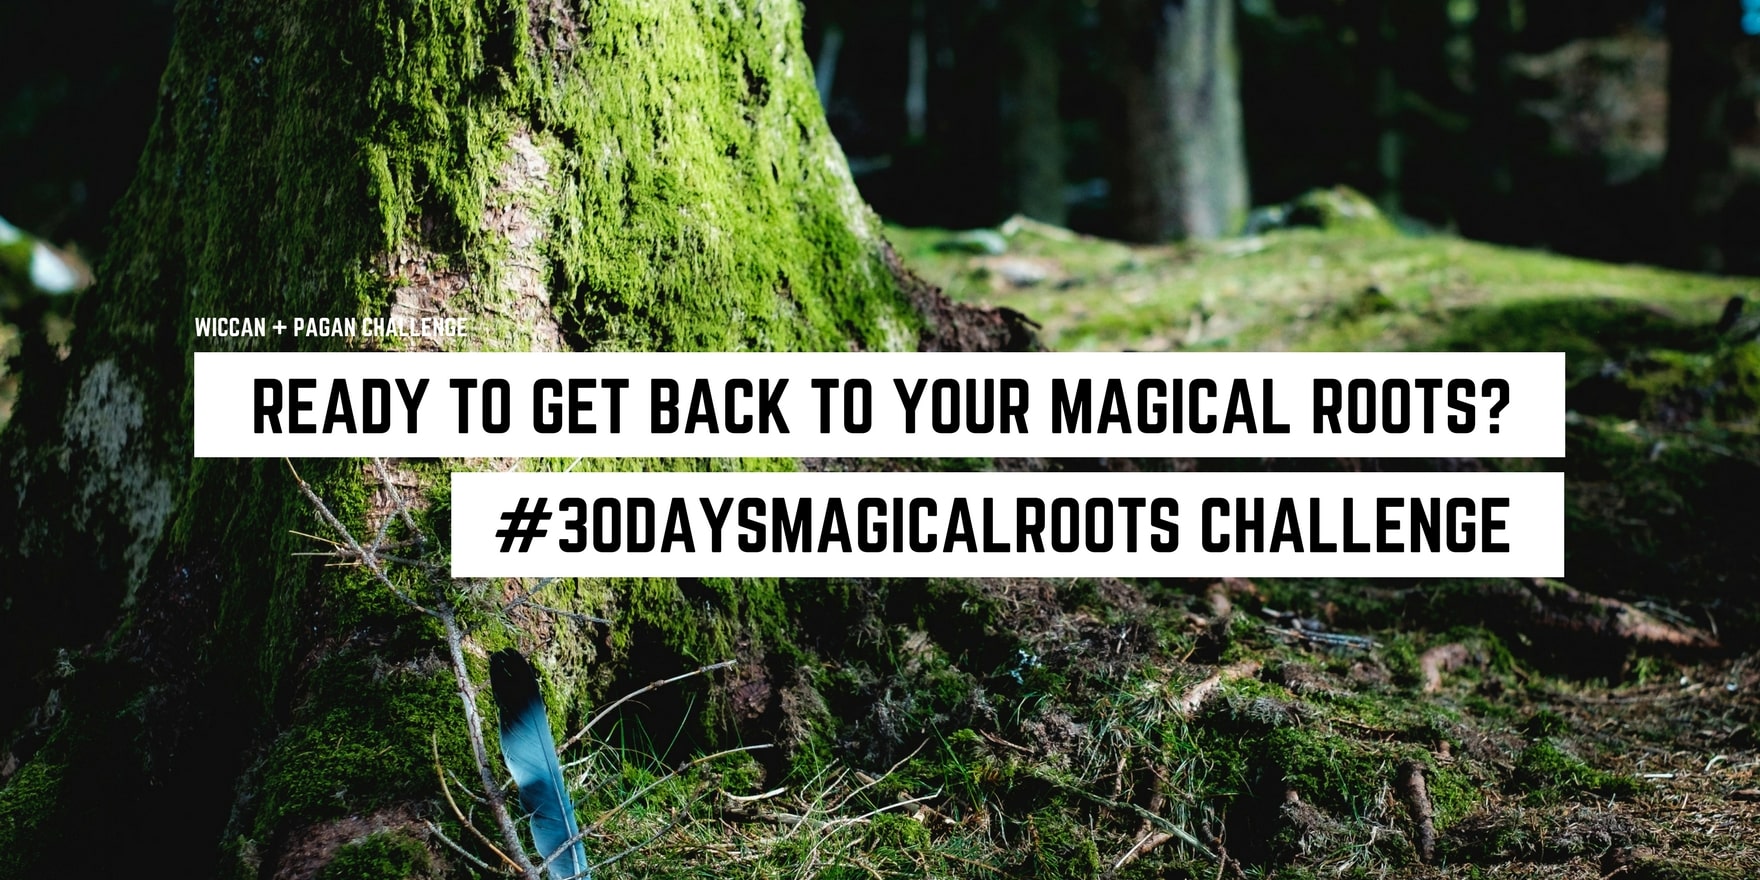 The #30DaysMagicalRoots Challenge